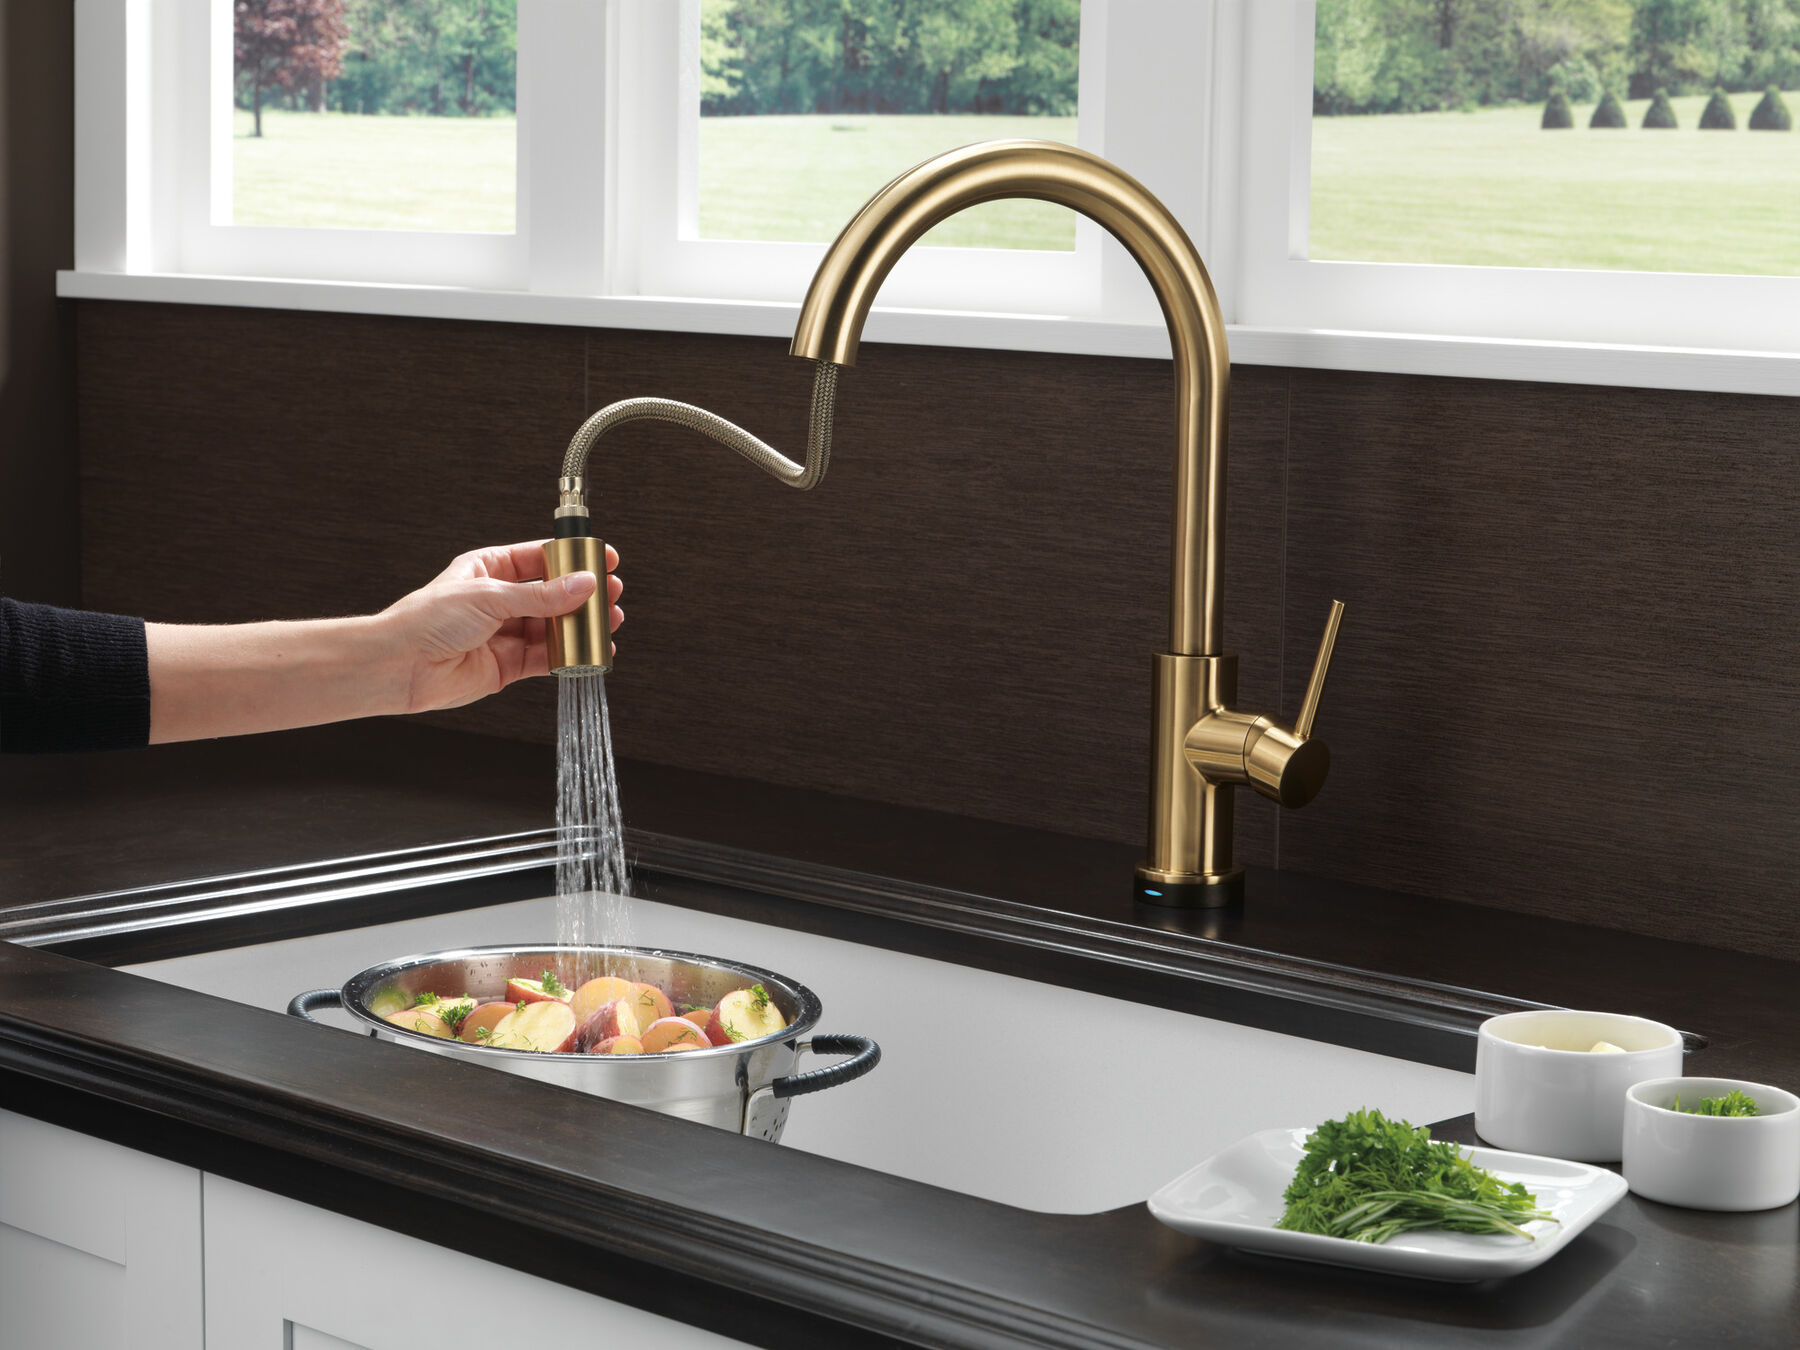 Single Handle Pull-Down Kitchen Faucet with Touch2O® Technology in  Champagne Bronze 9159T-CZ-DST